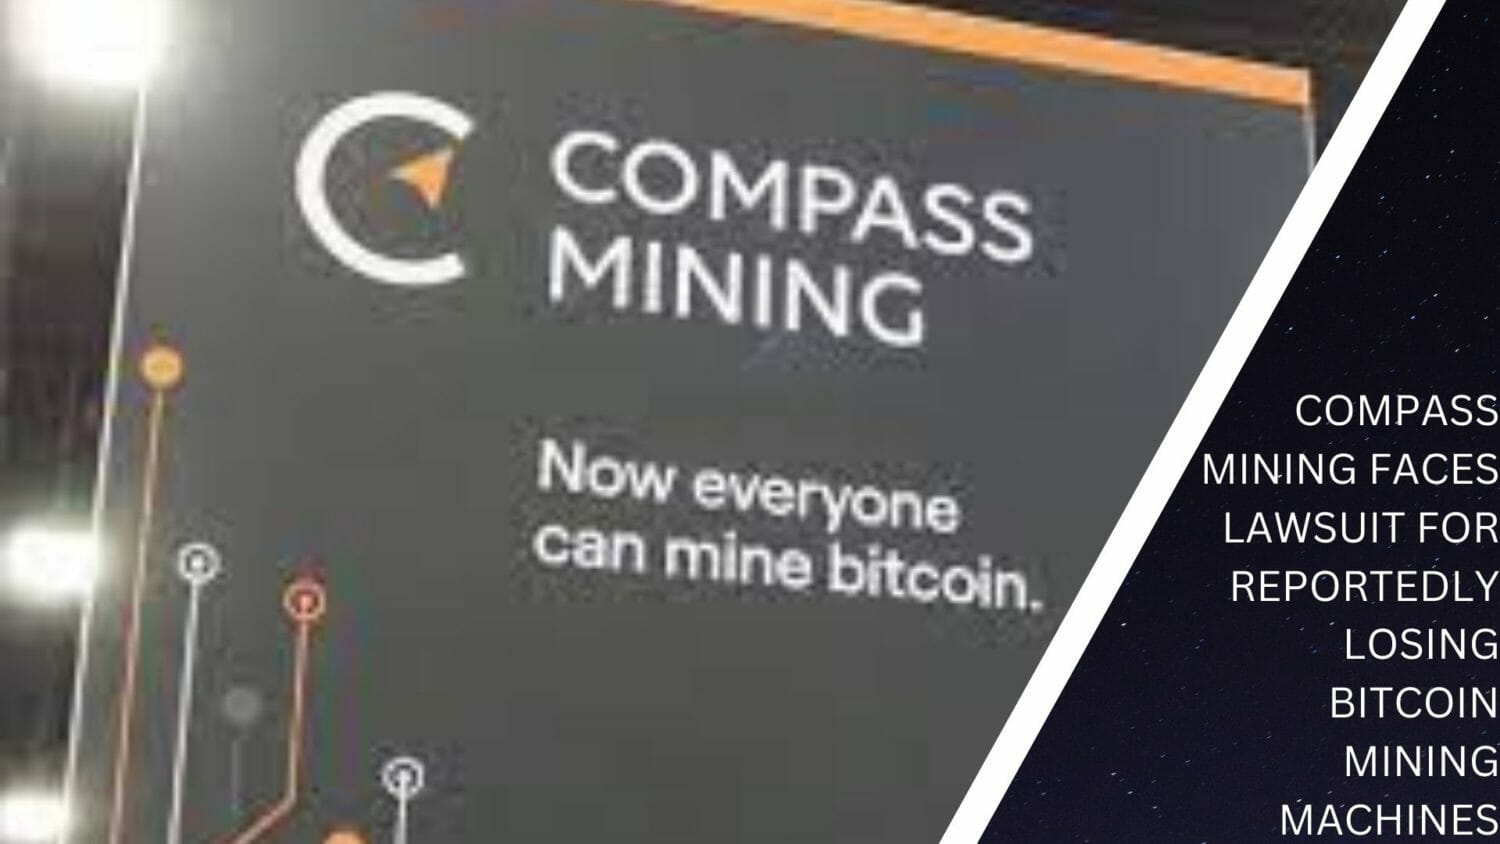 Compass Mining Faces Lawsuit For Reportedly Losing Bitcoin Mining Machines